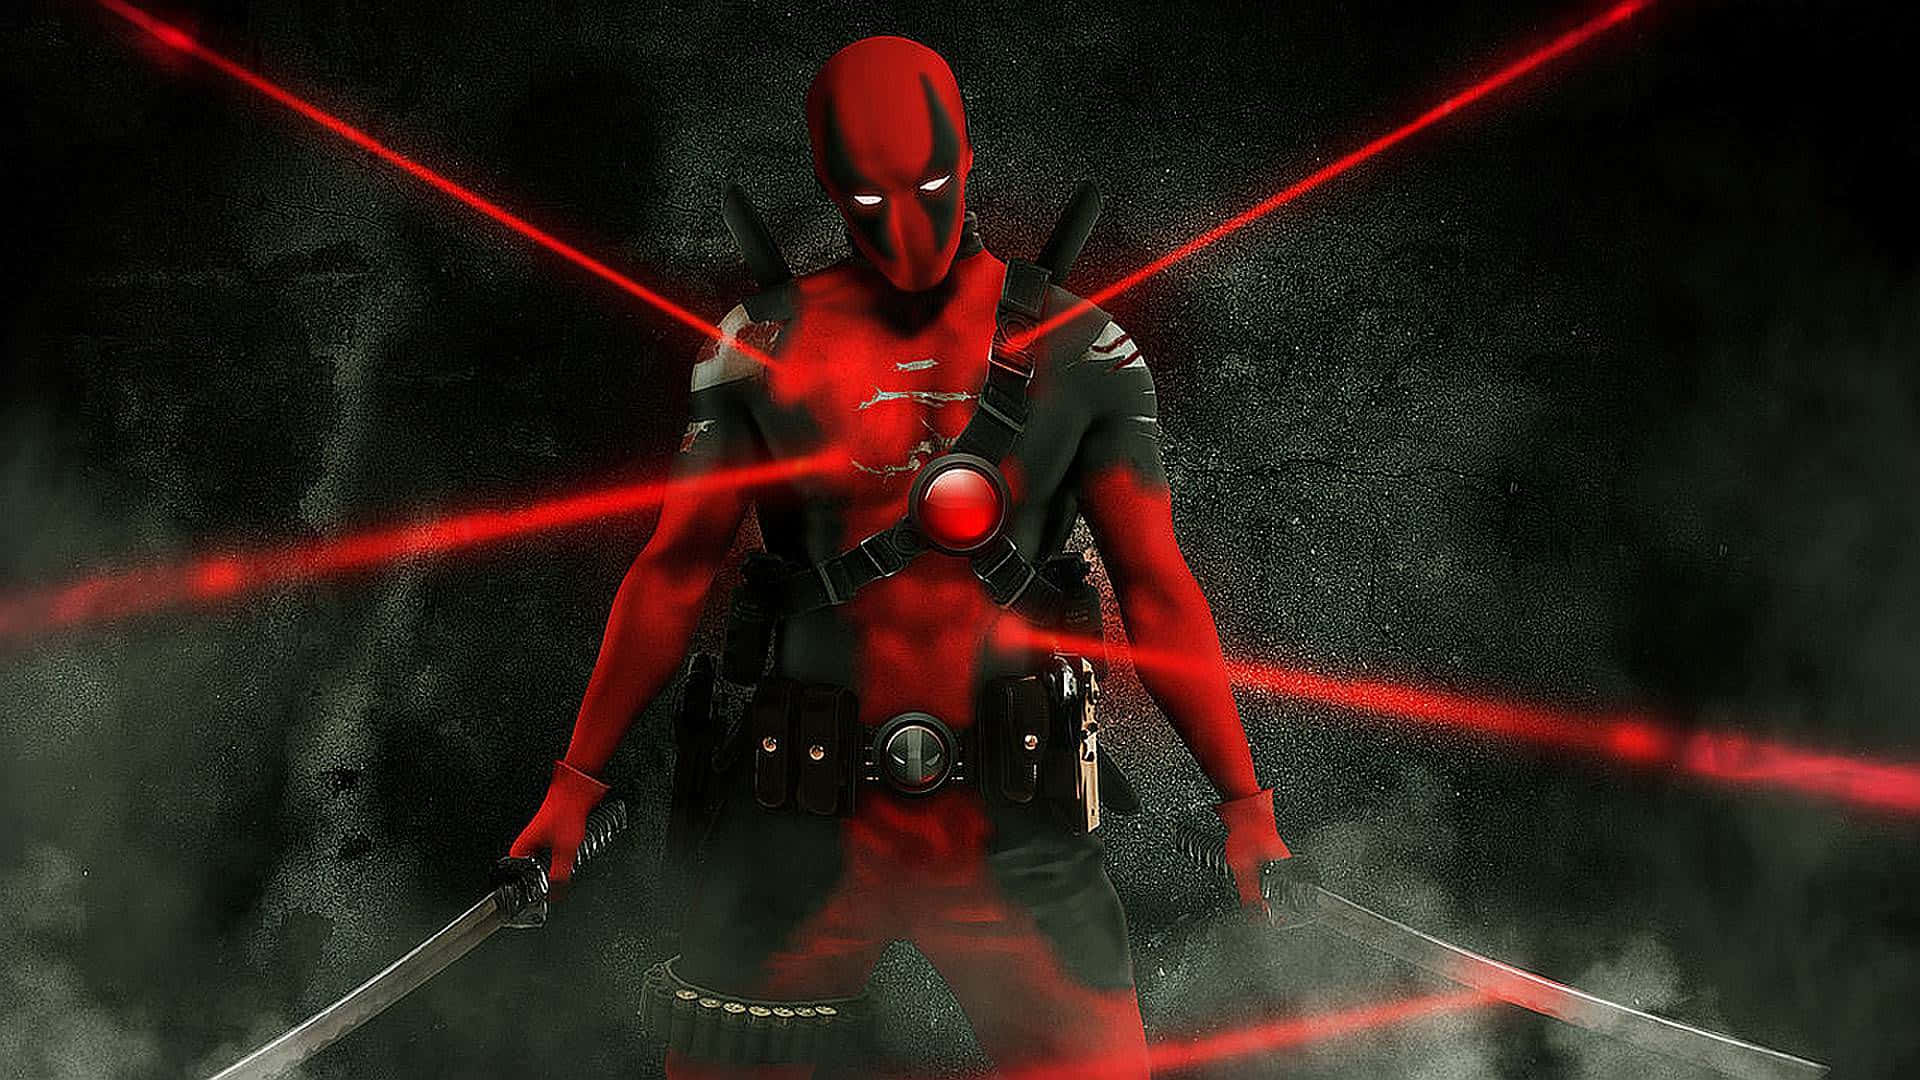 Deadpool Background Pointed By Aiming Laser Lights